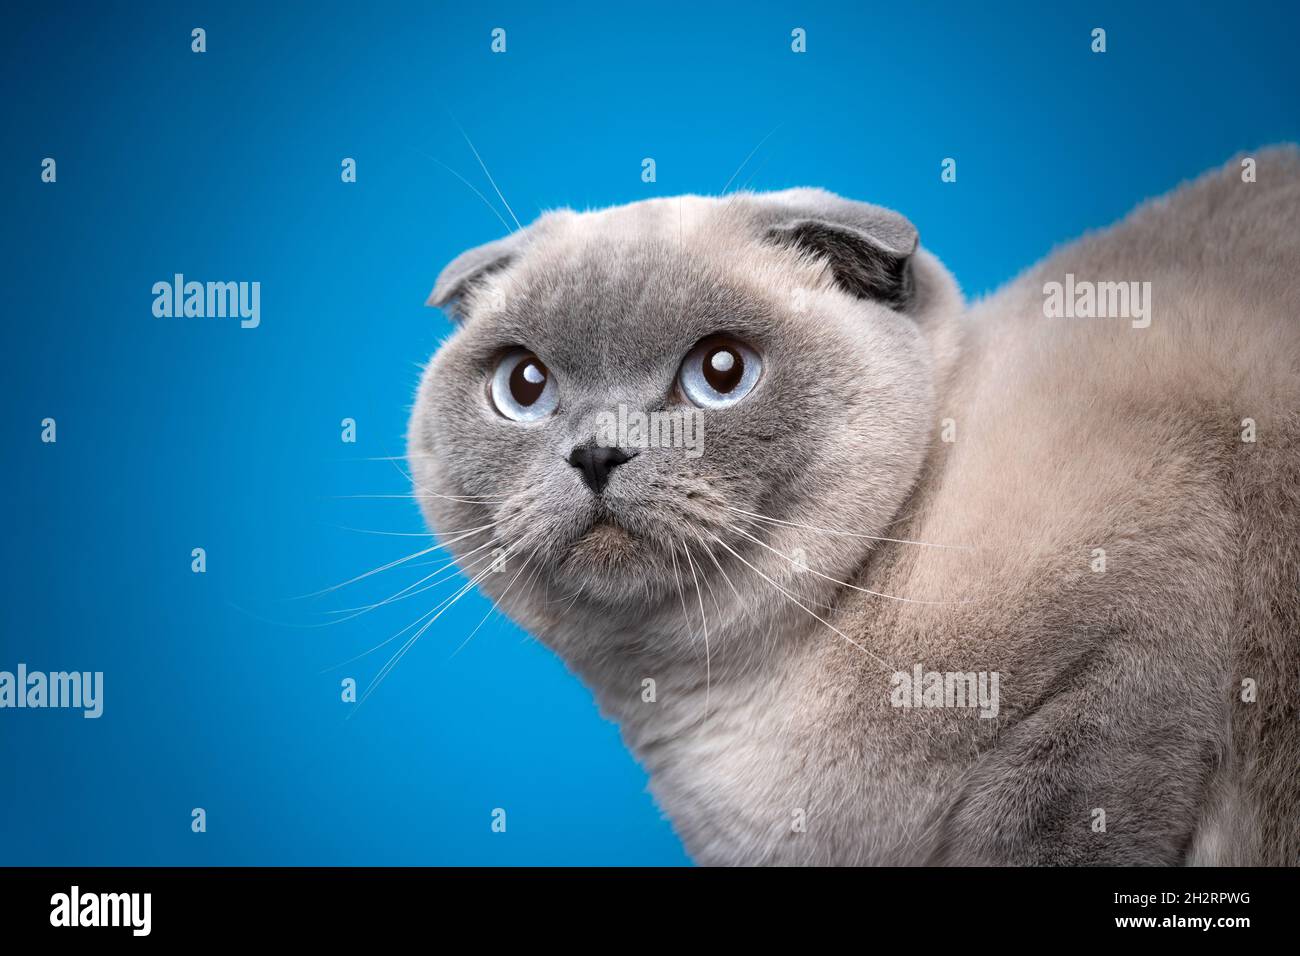 blue point scottish fold cat portrait on blue background with copy space Stock Photo